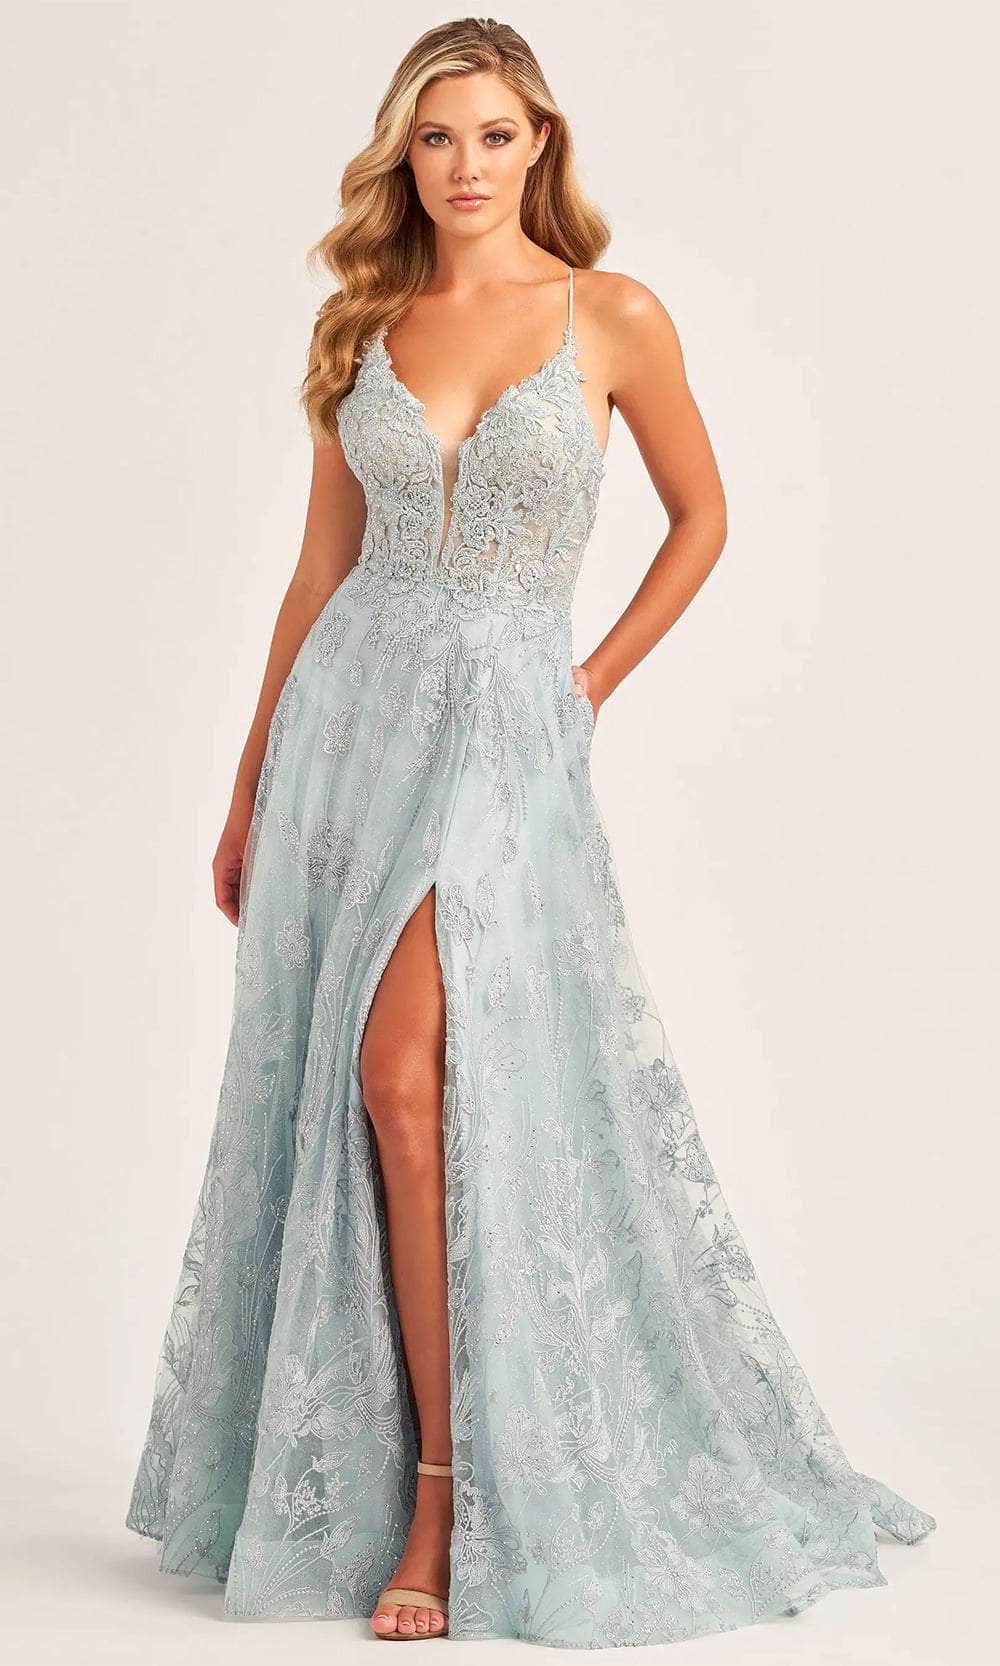 Image of Ellie Wilde EW35103 - Embroidered Beaded Evening Dress